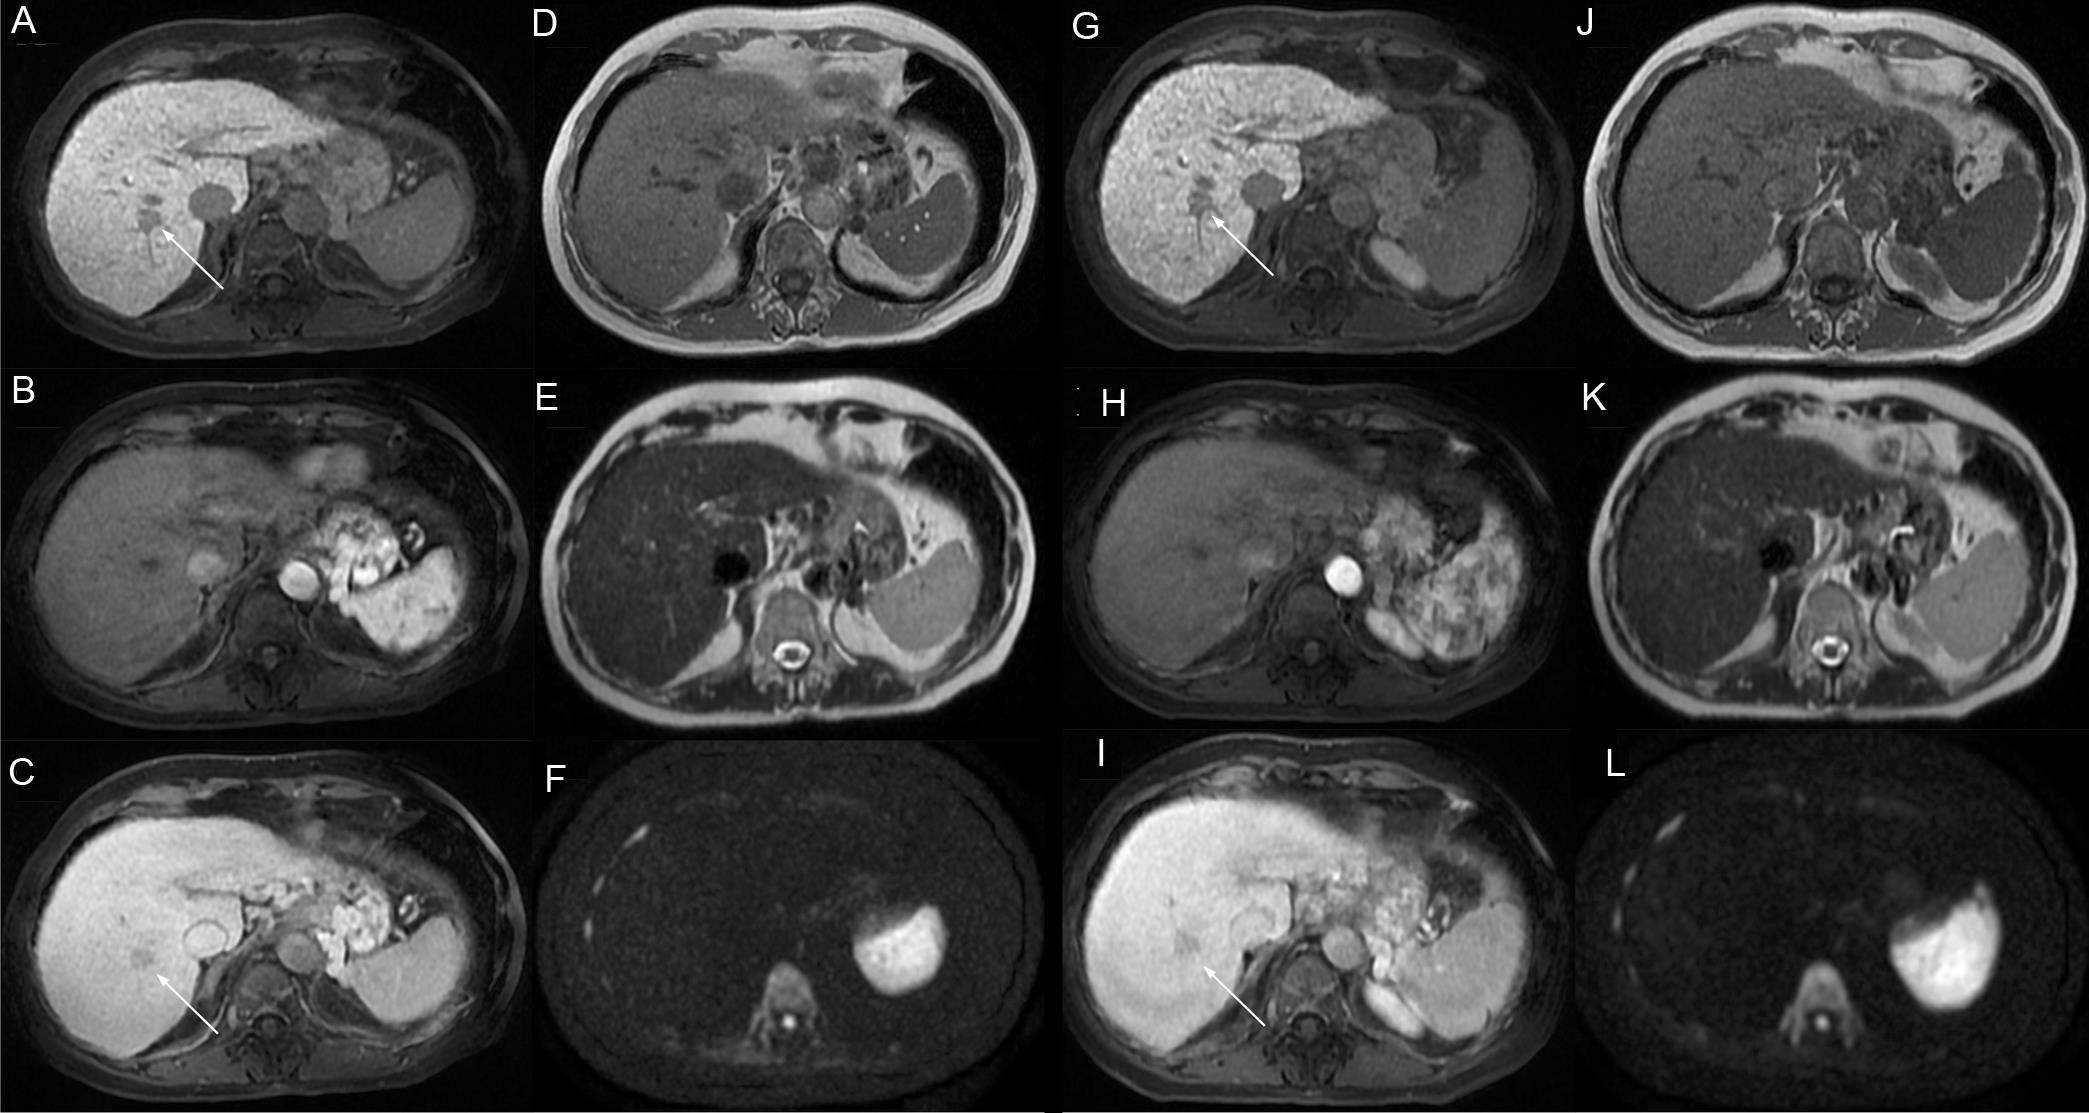 Axial MR images showing a hypointense 16 mm nodule in the hepatobiliary phase (HBP) located in liver segment 8.